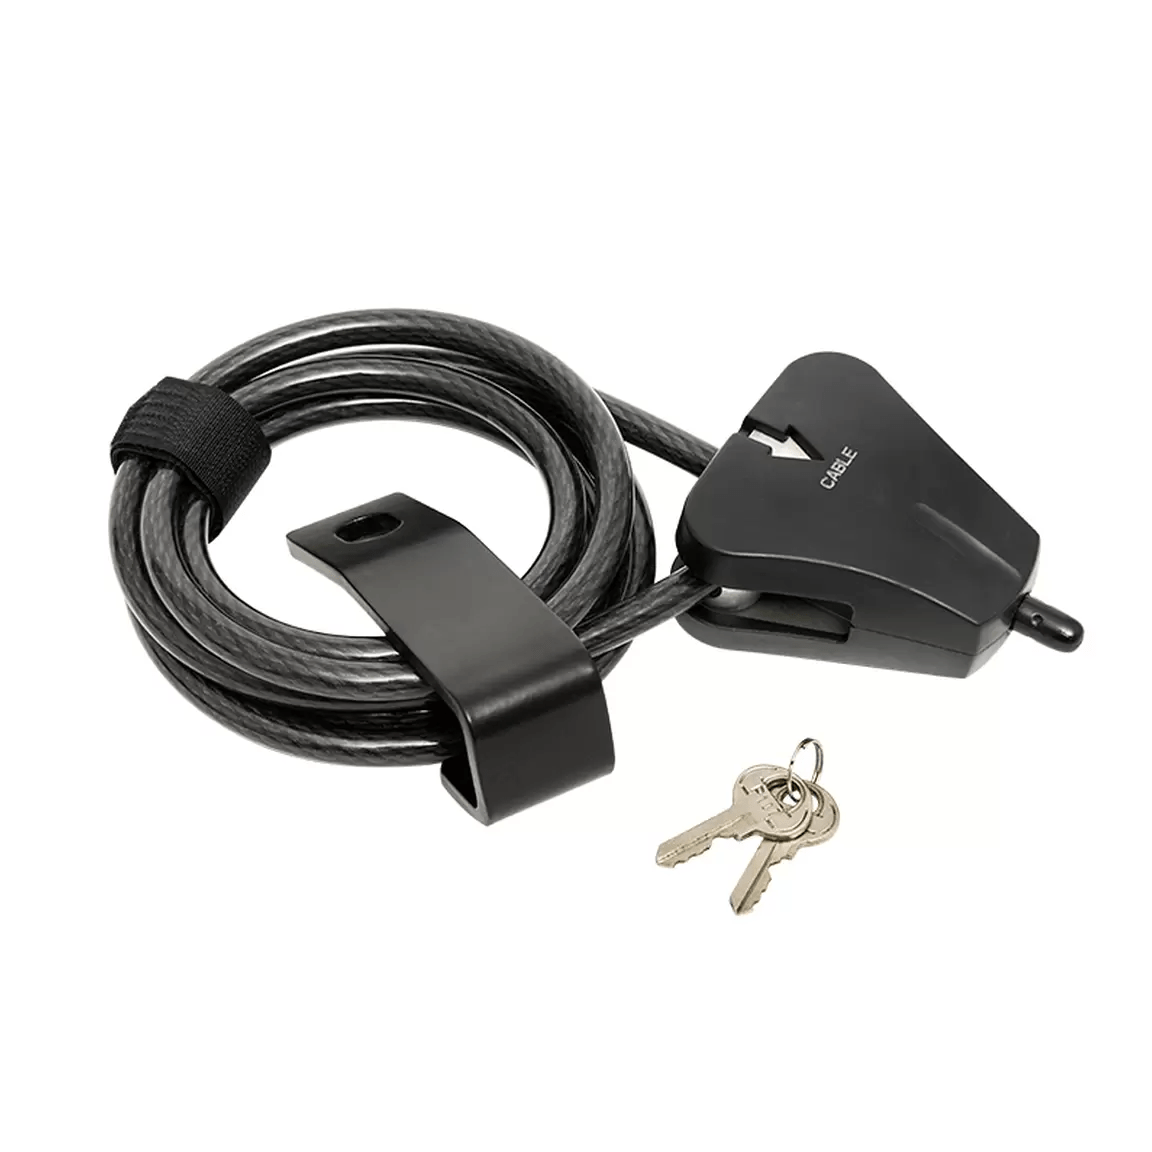 Yeti Drinkware & Coolers Security Cable Lock & Bracket V3